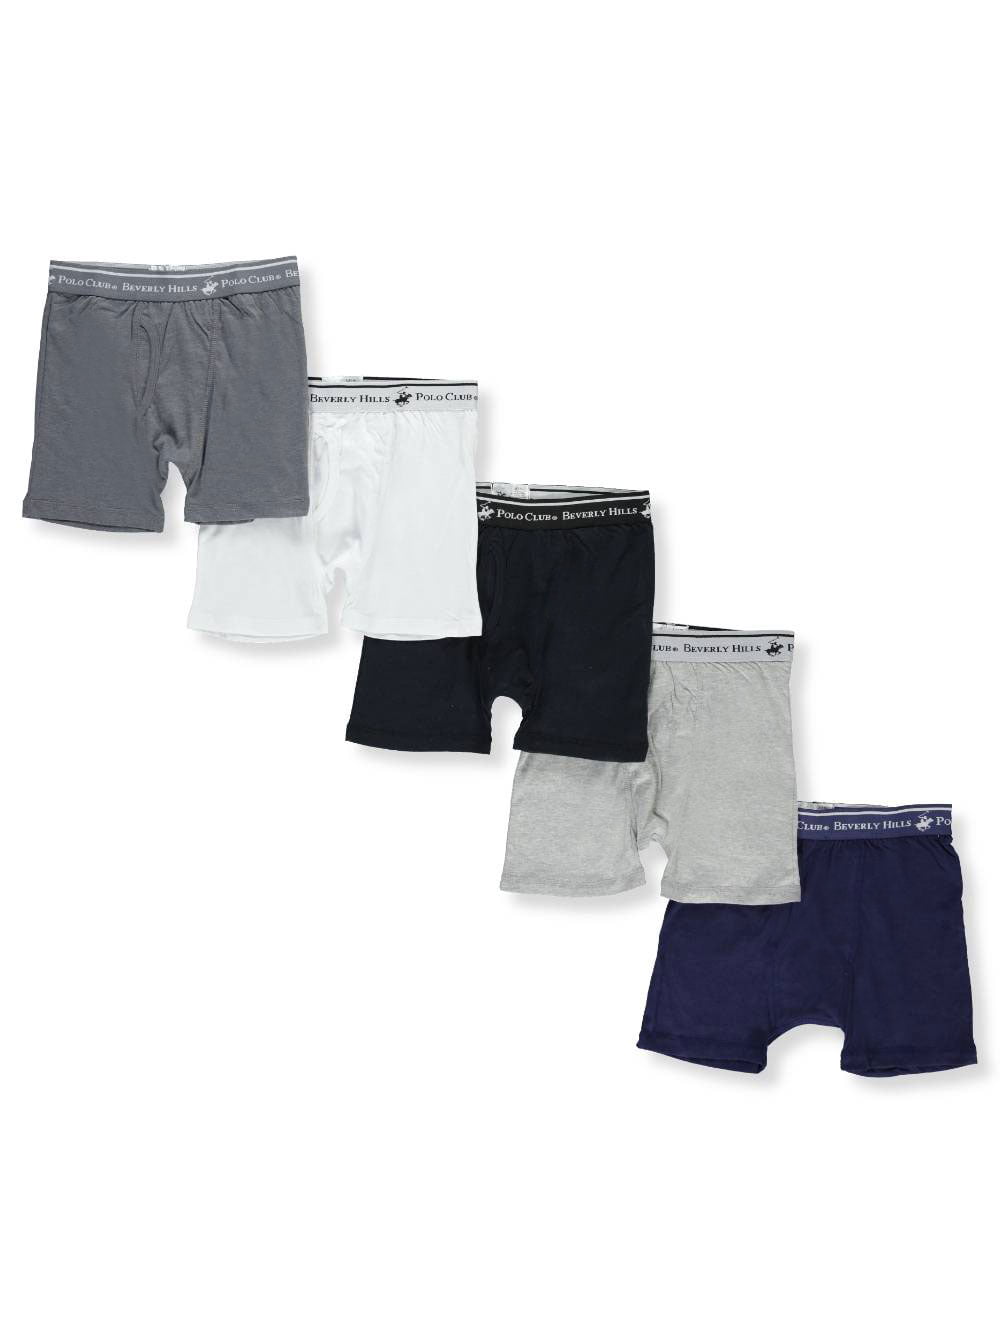 Beverly Hills Polo Club Boys Boxer Briefs Pack of 5 